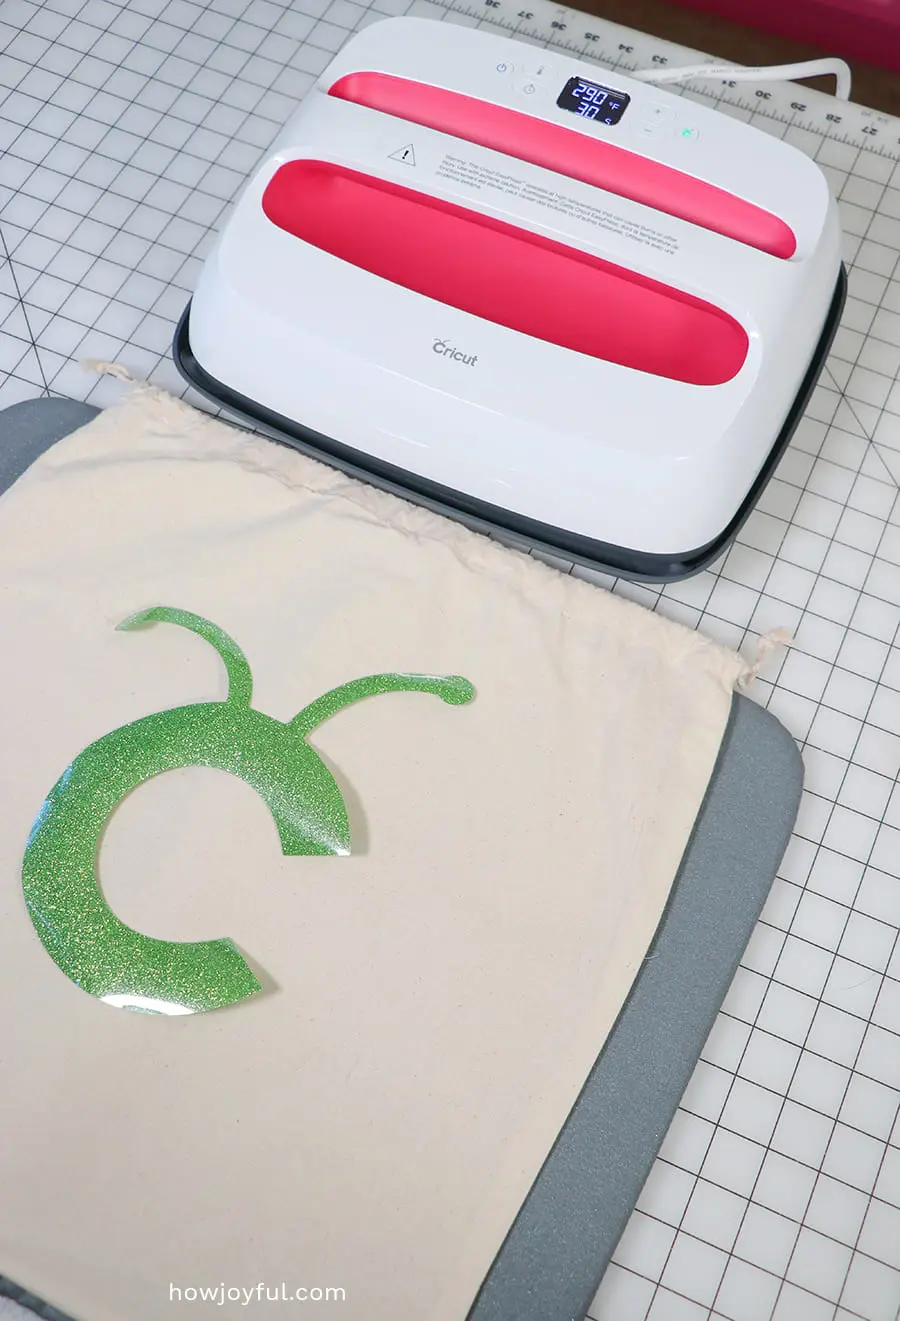 Cricut EasyPress Machine Intro: What can I burn today?